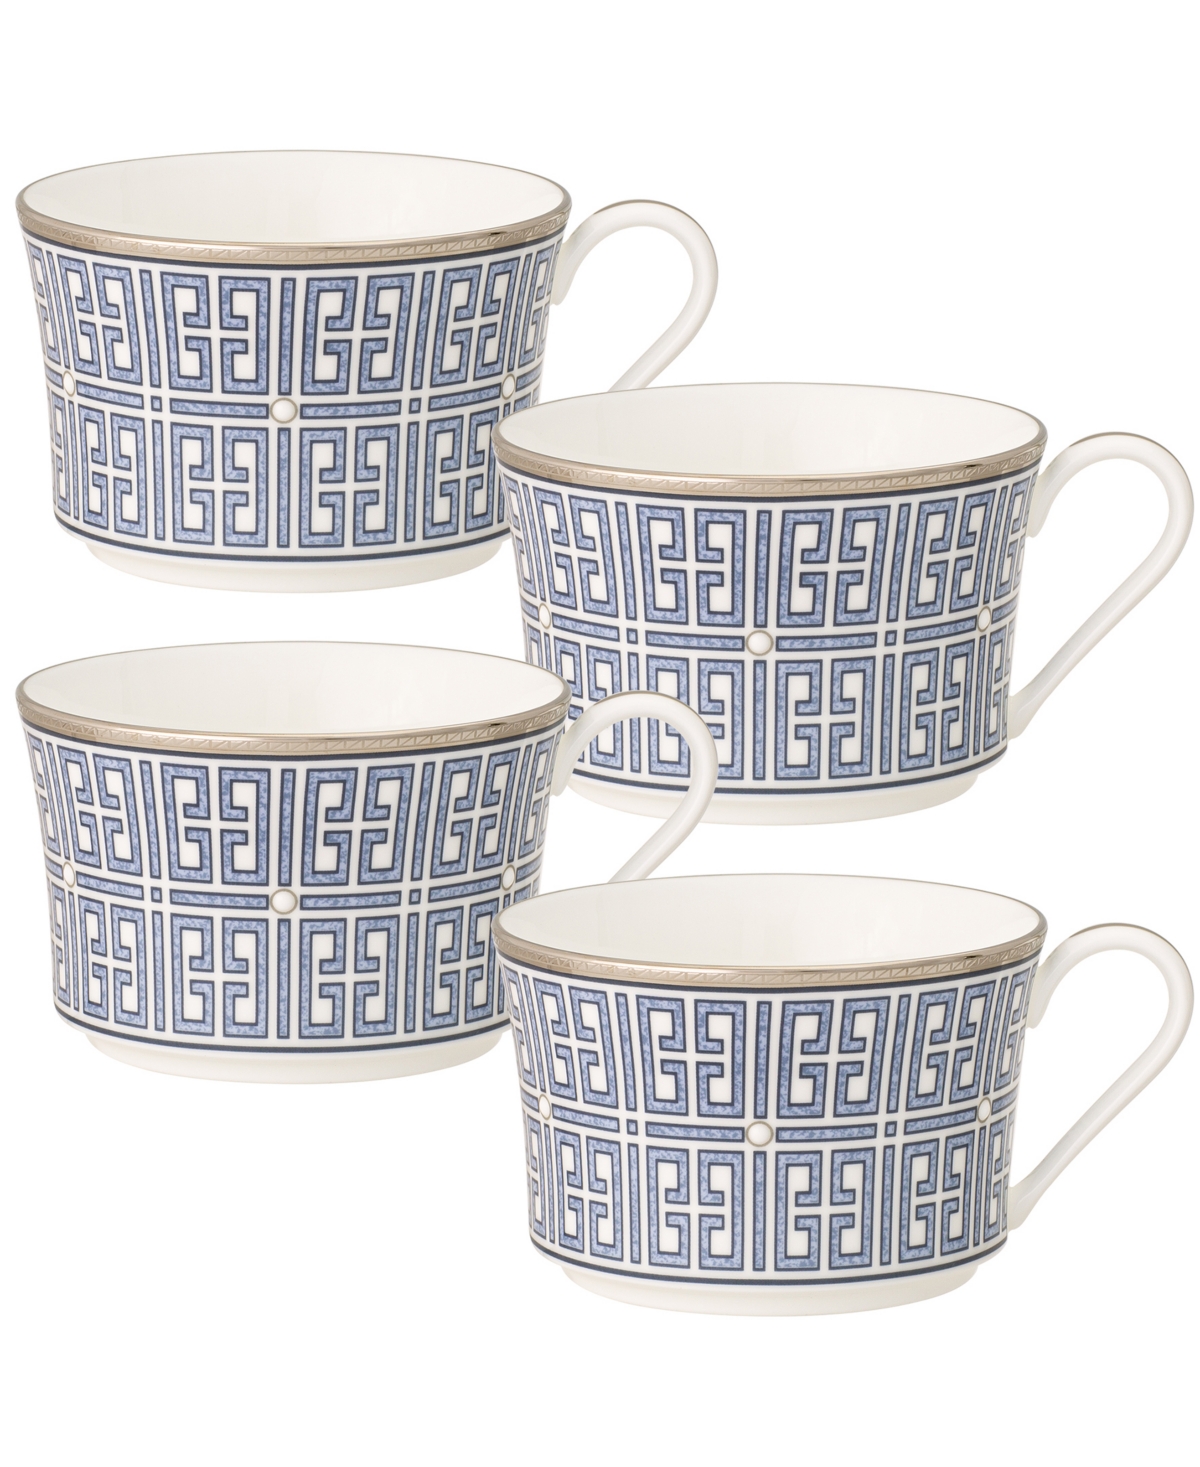 Noritake Infinity 4 Piece Cup Set, Service For 4 In Blue